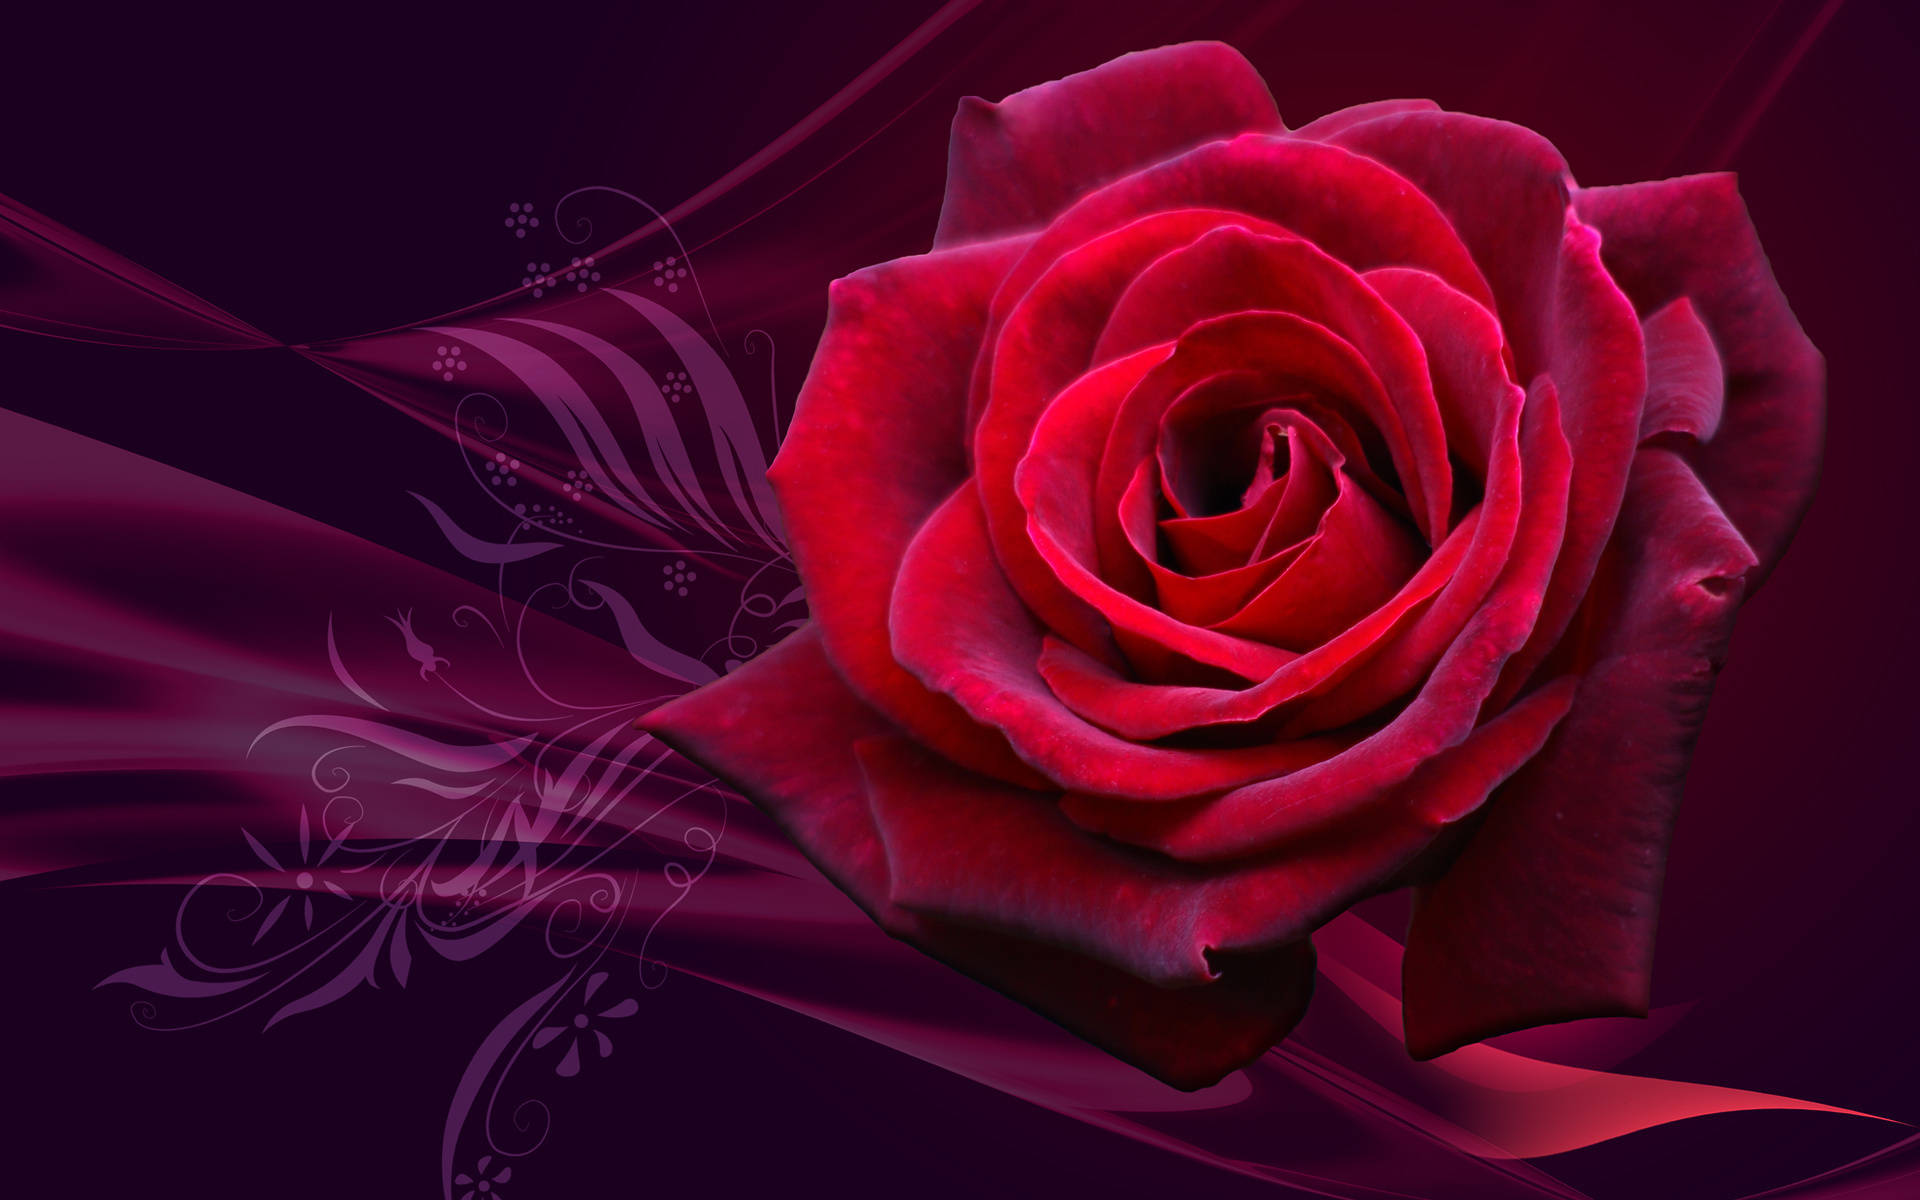 Red Rose Head On Plum-colored Background Wallpaper